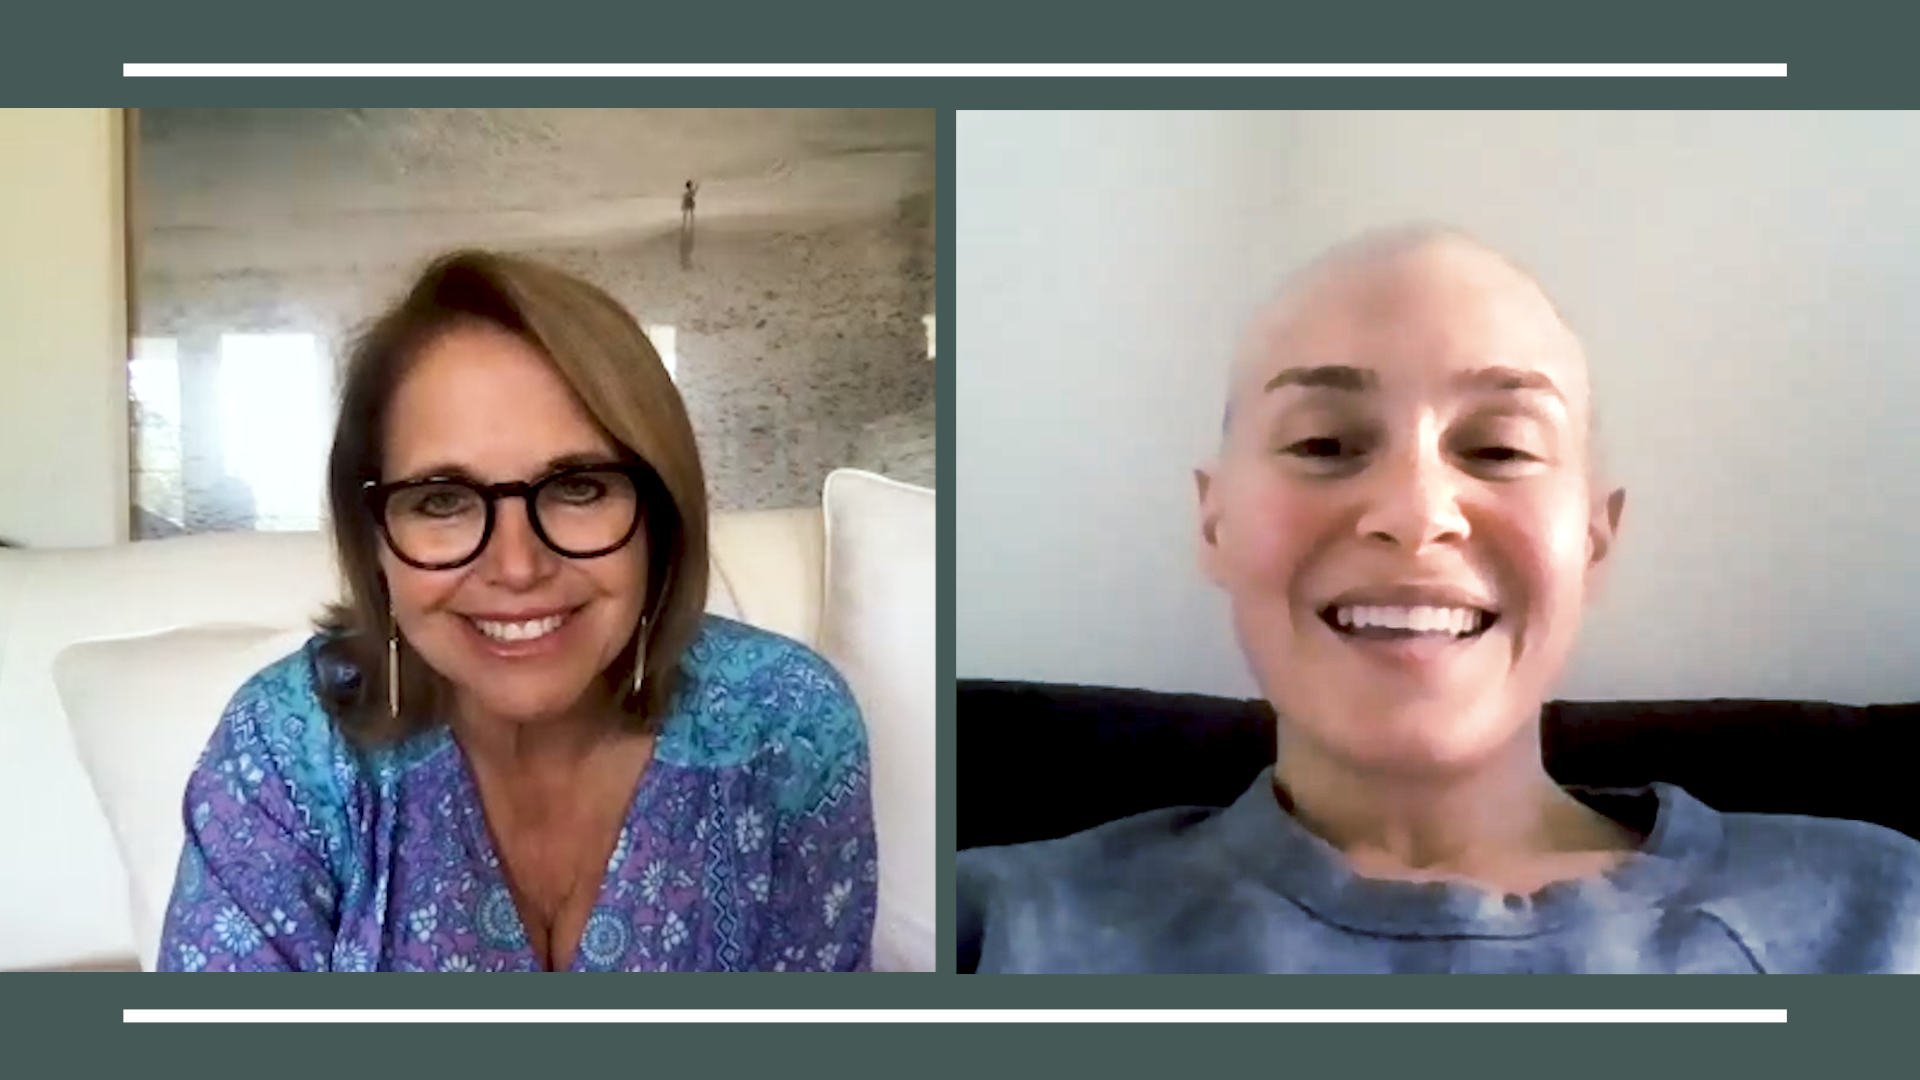 Katie Couric for Merck series on cancer during COVID-19